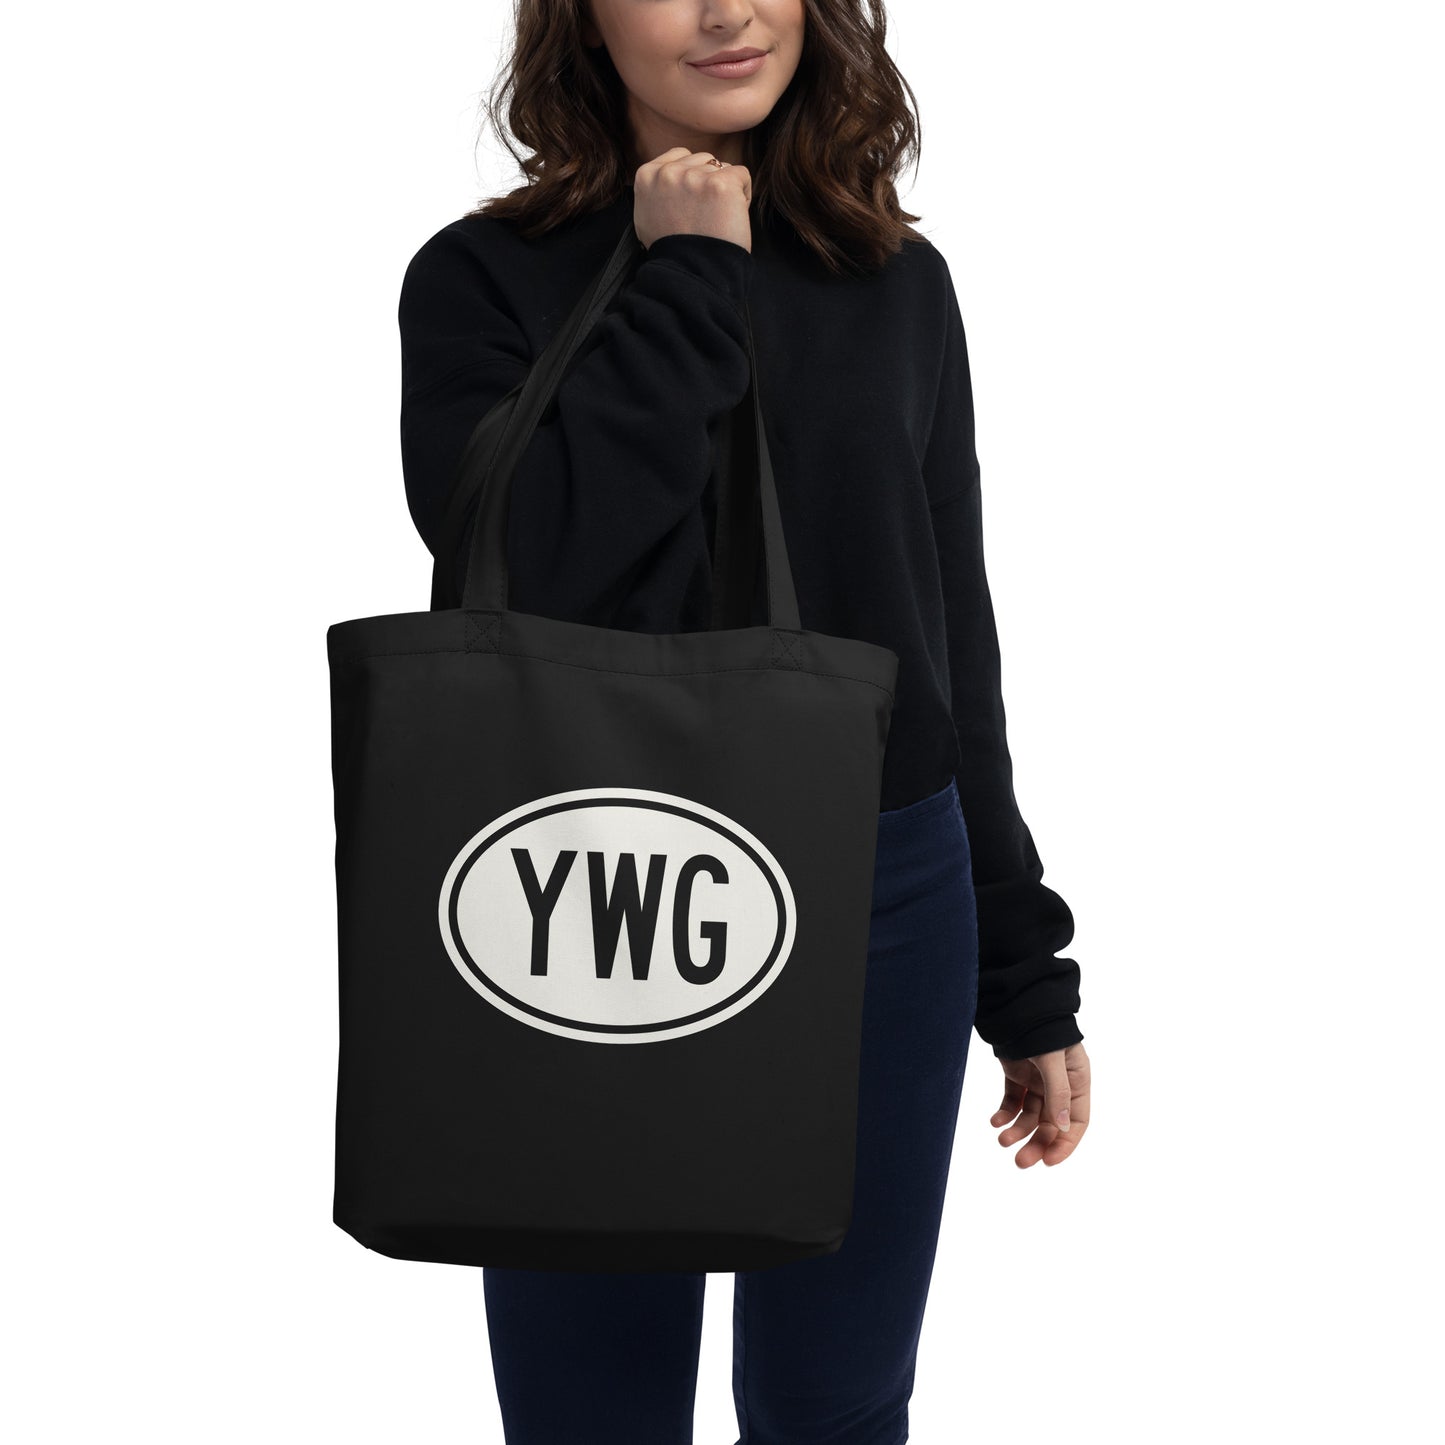 Unique Travel Gift Organic Tote - White Oval • YWG Winnipeg • YHM Designs - Image 03